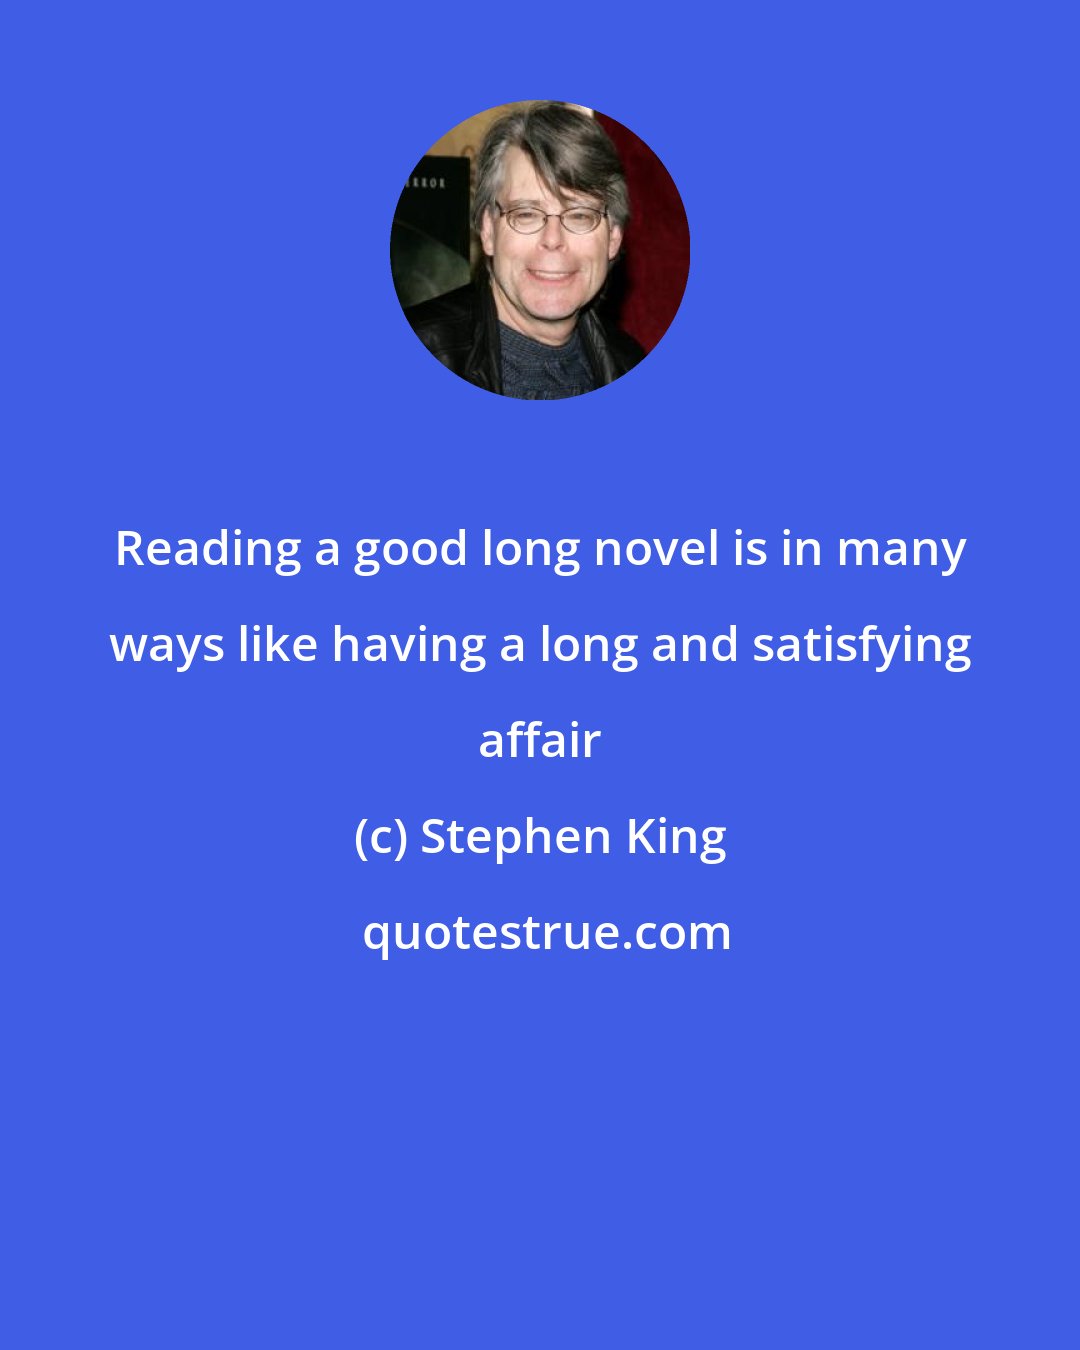 Stephen King: Reading a good long novel is in many ways like having a long and satisfying affair